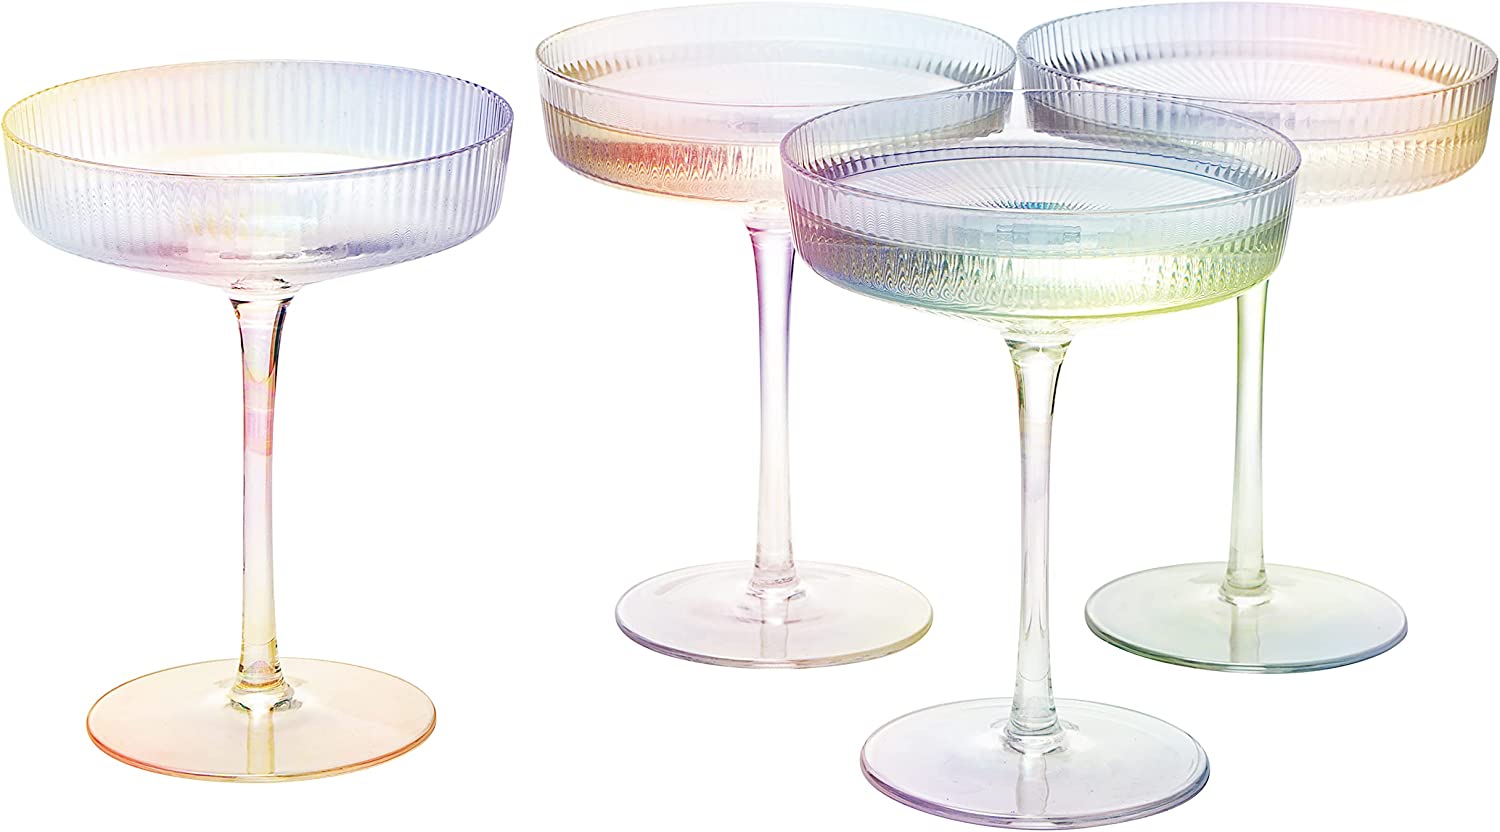 Set of 4 Iridescent Ribbed Champagne Coupe Glasses by The Wine Savant - The Kindness Cause